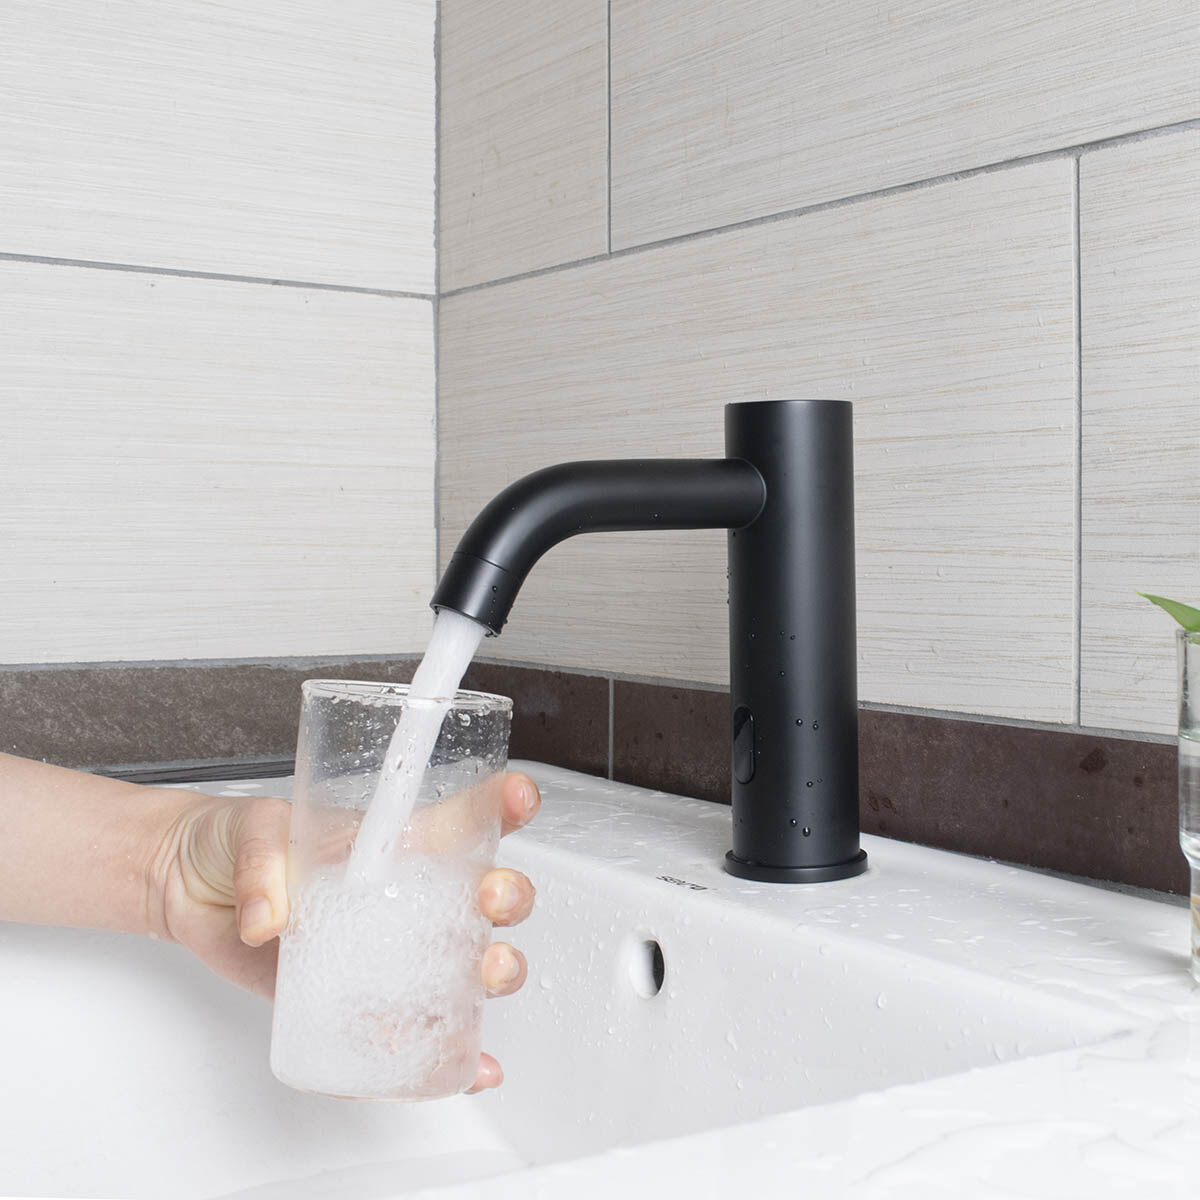 How Automatic Sensor Faucets Can Help Conserve Water and Reduce Costs?